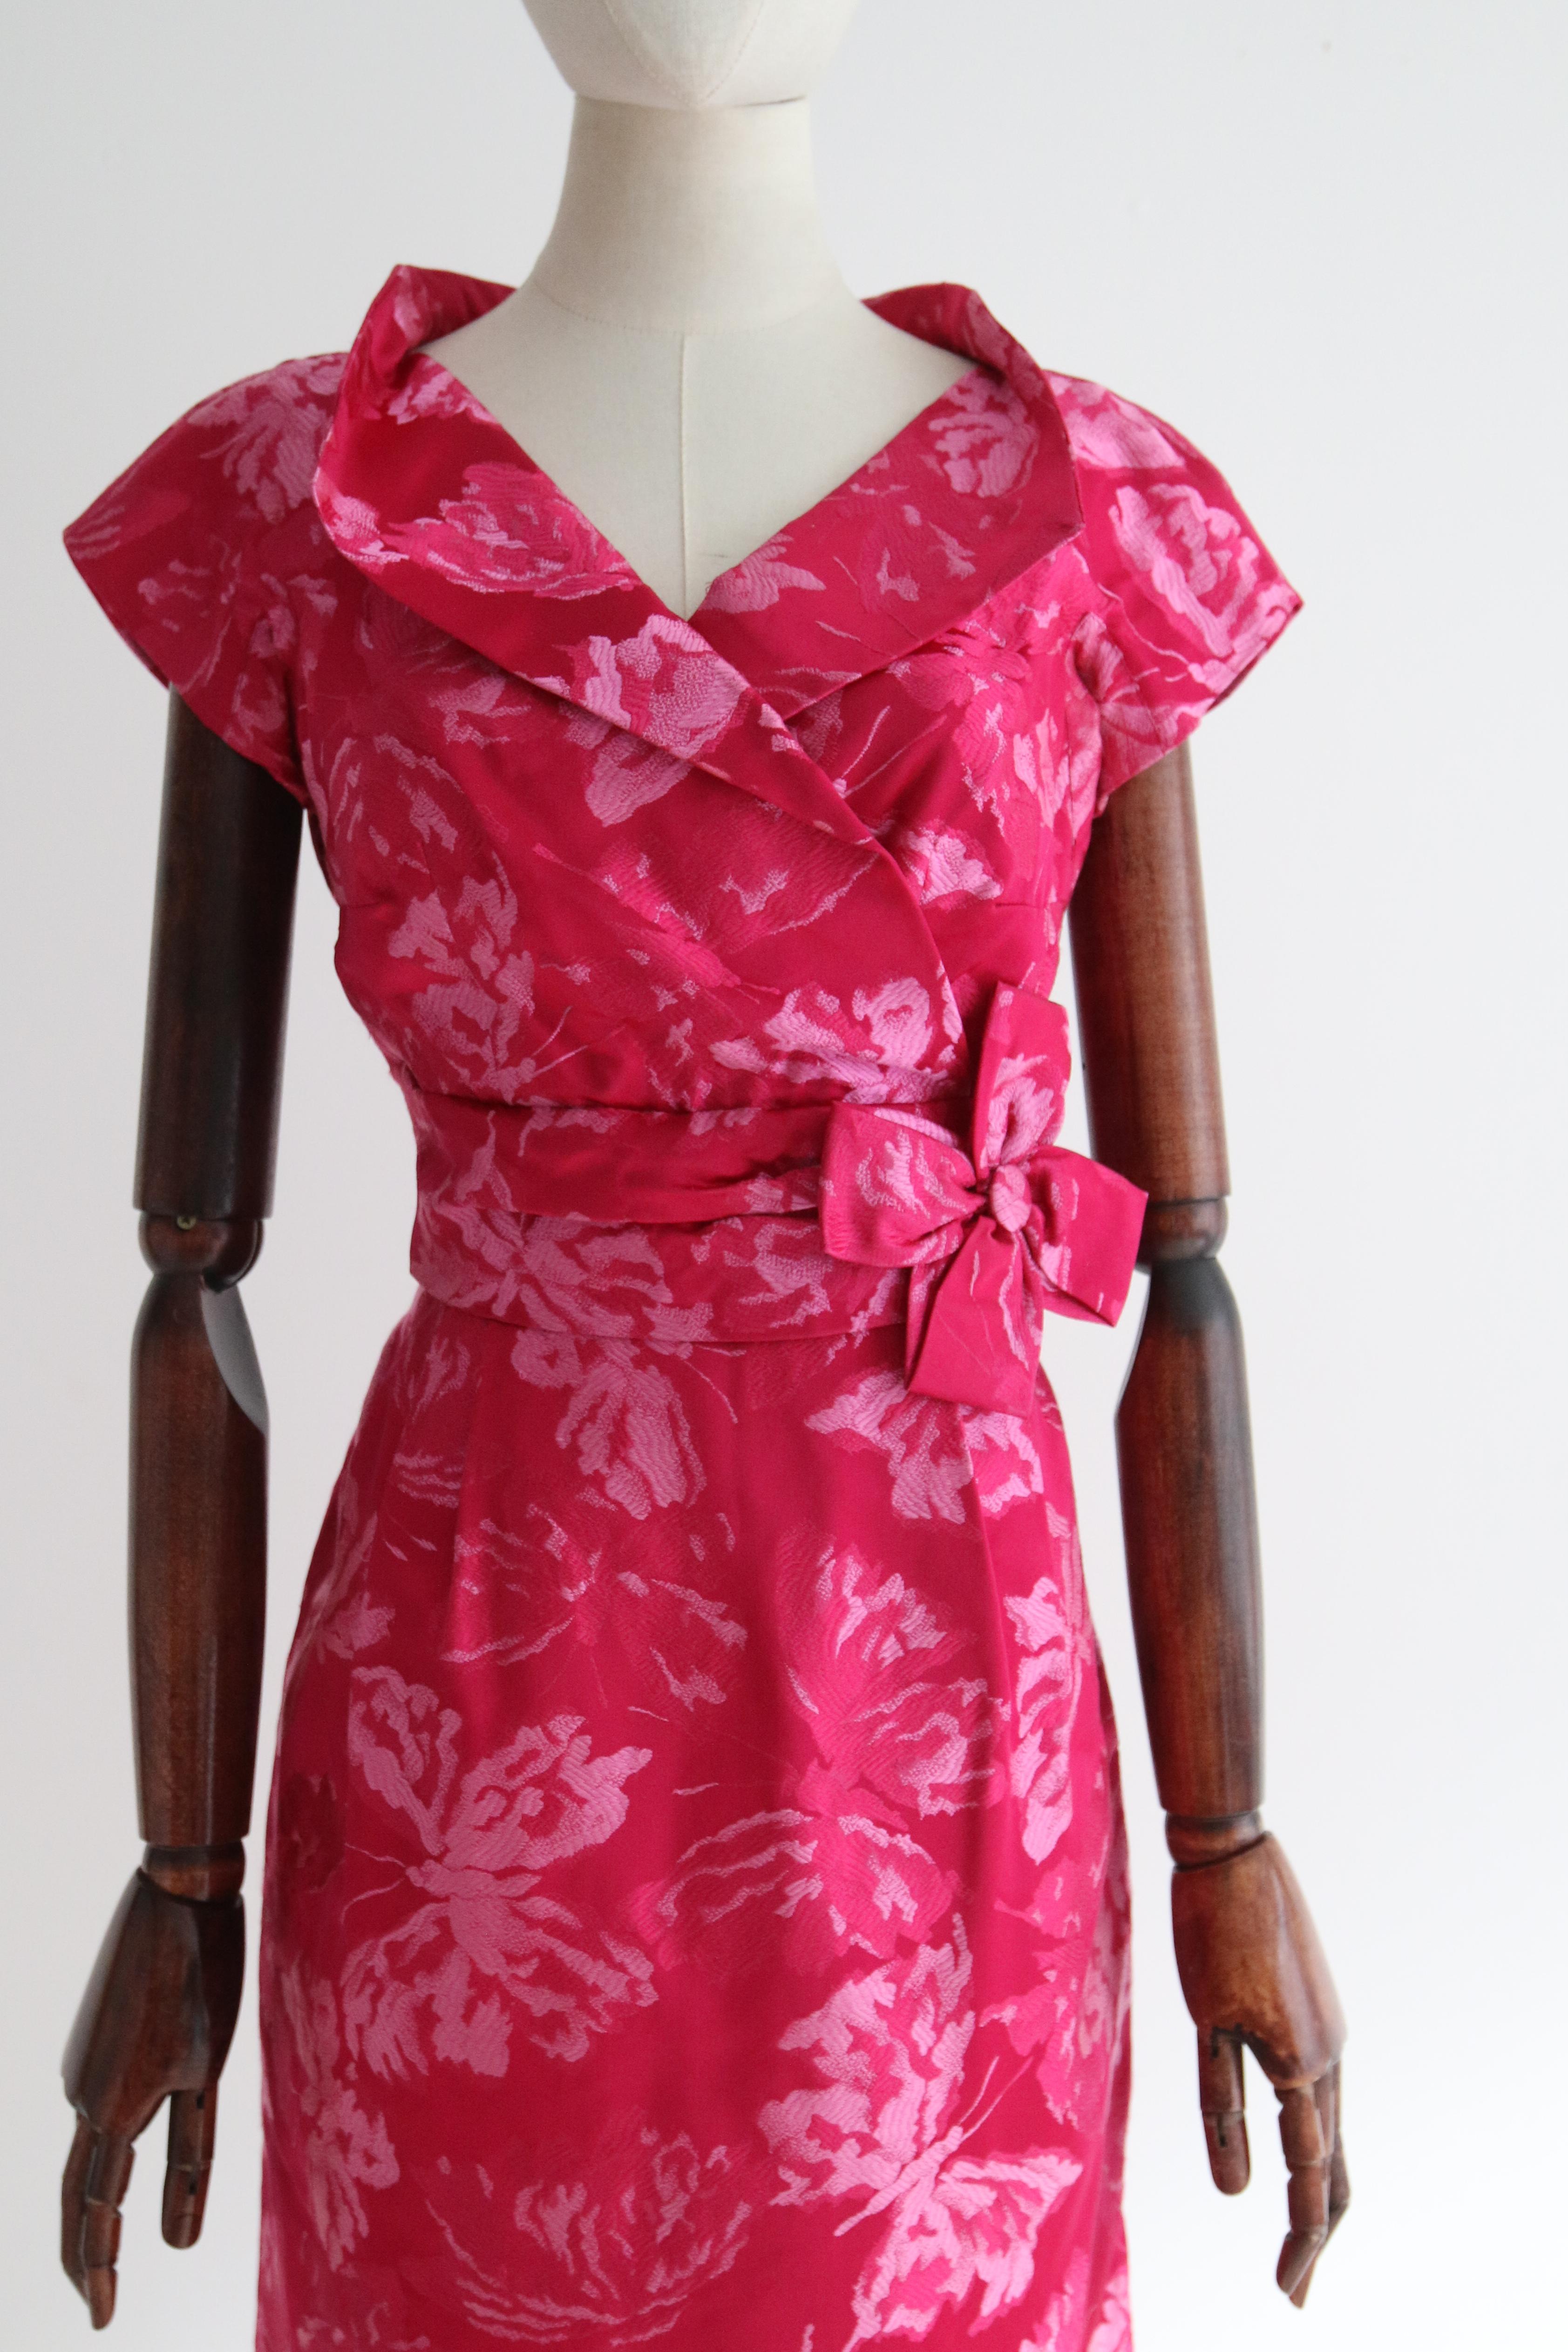 Vintage 1950's Silk Brocade Butterfly Dress UK 8-10 US 4-6 In Good Condition For Sale In Cheltenham, GB